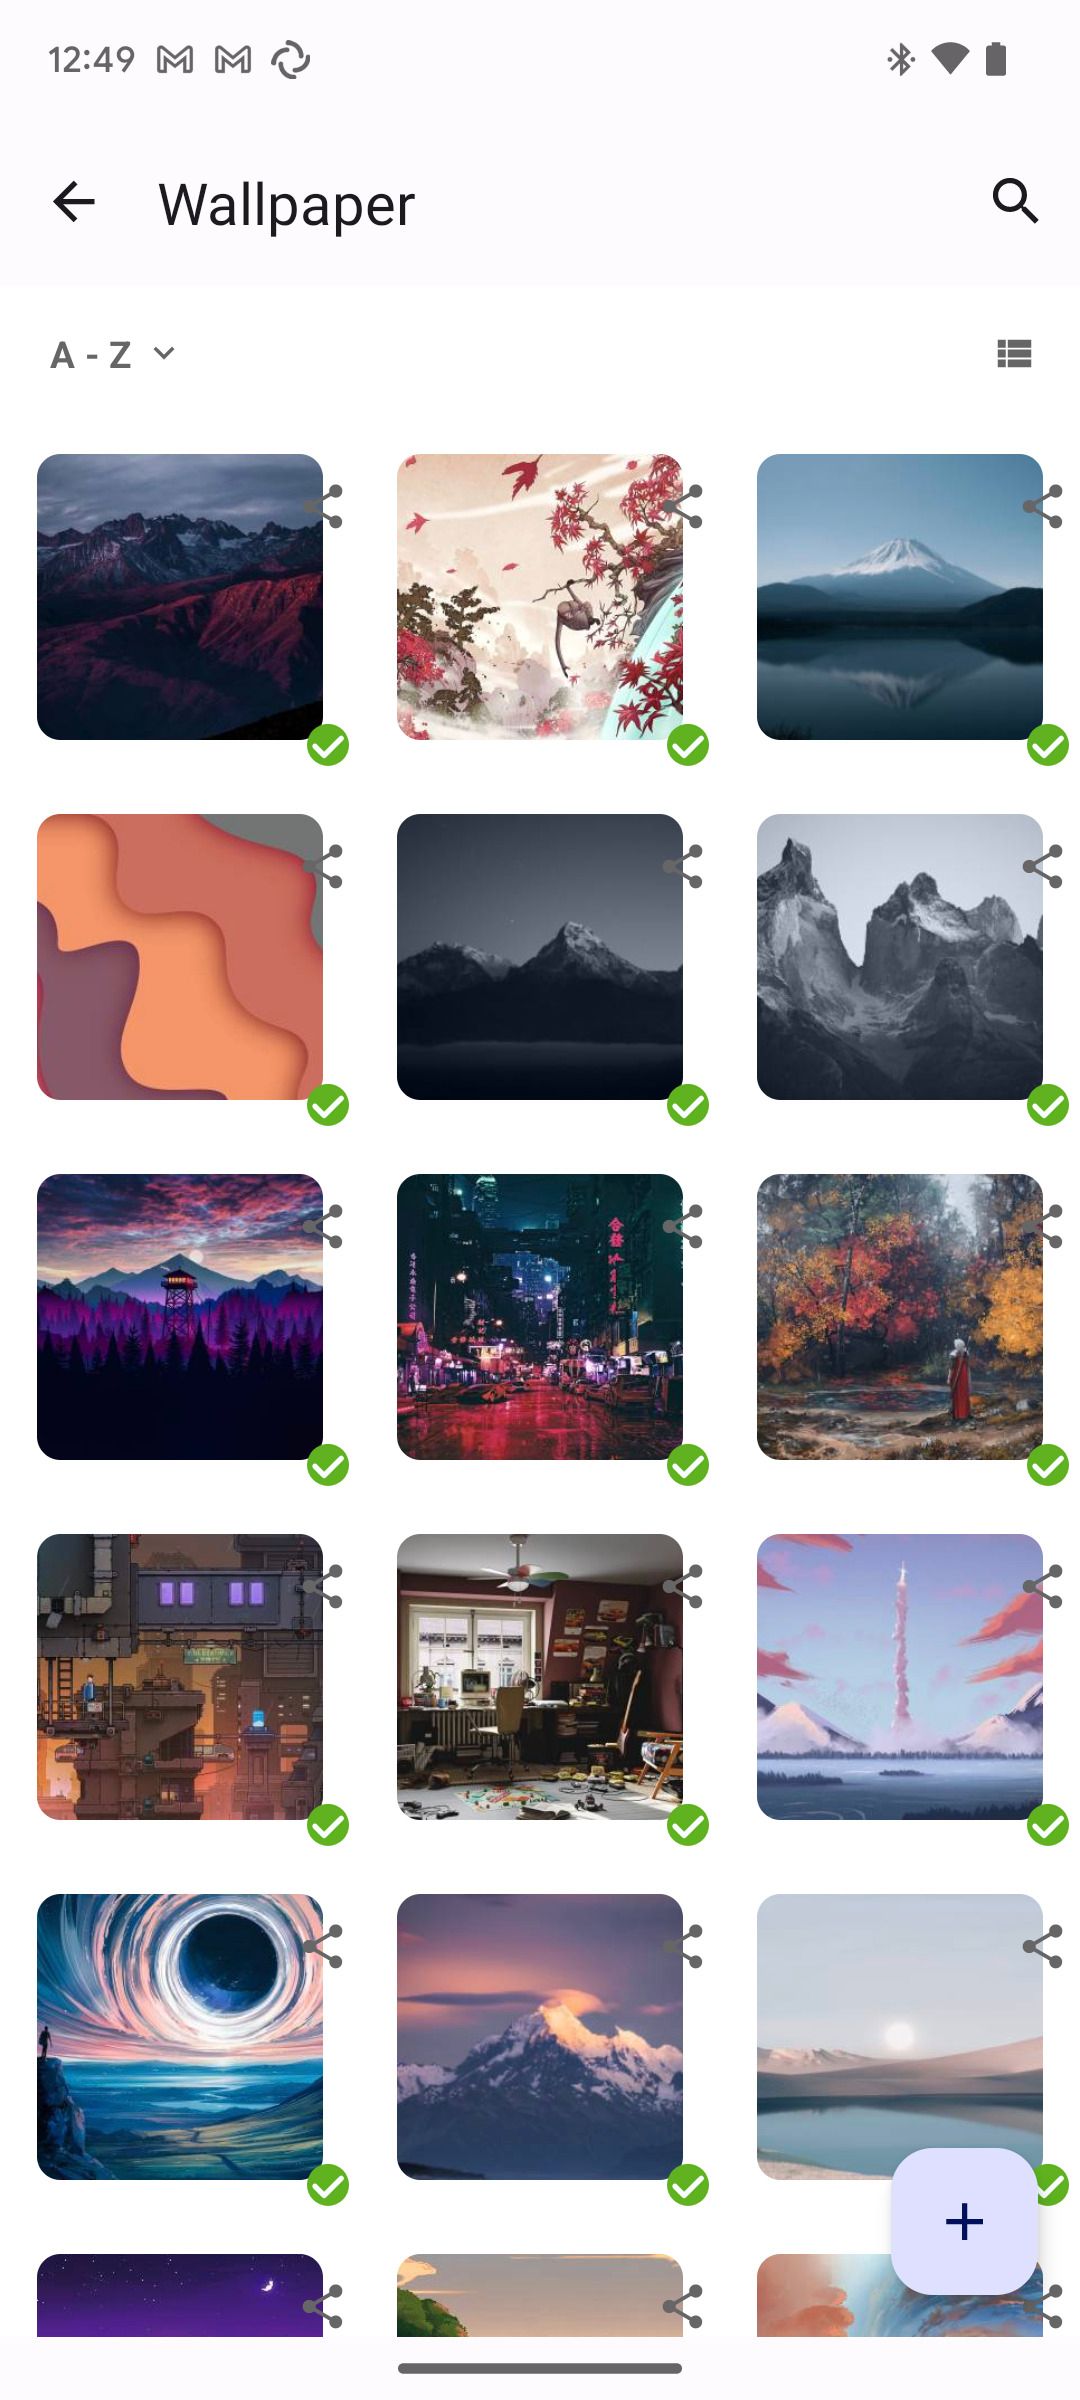 A collection of wallpapers in thumbnails on the Android Nextcloud app.